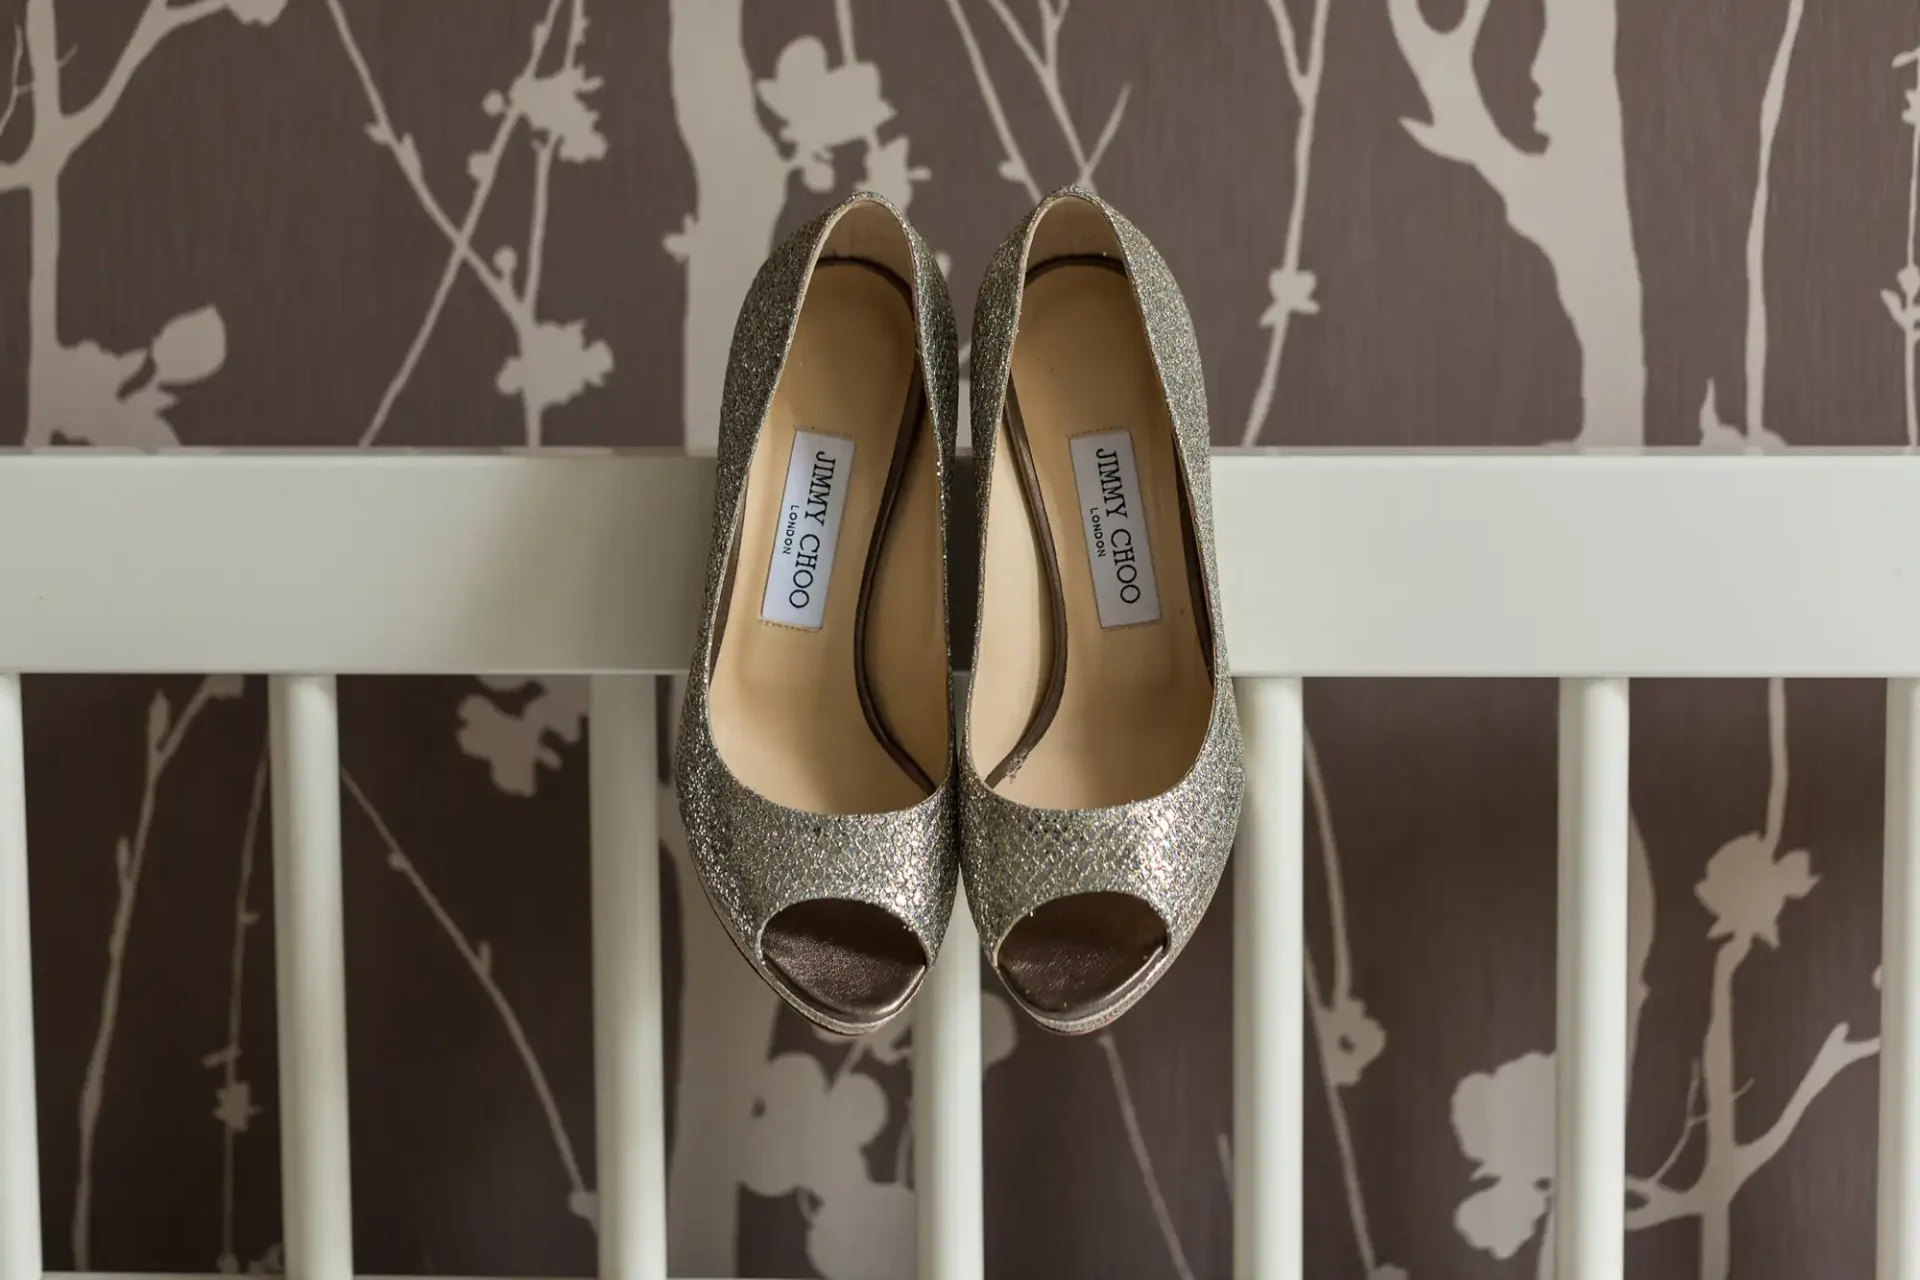 A pair of glittery jimmy choo high heels displayed on a white wooden ledge against a floral-patterned wall.